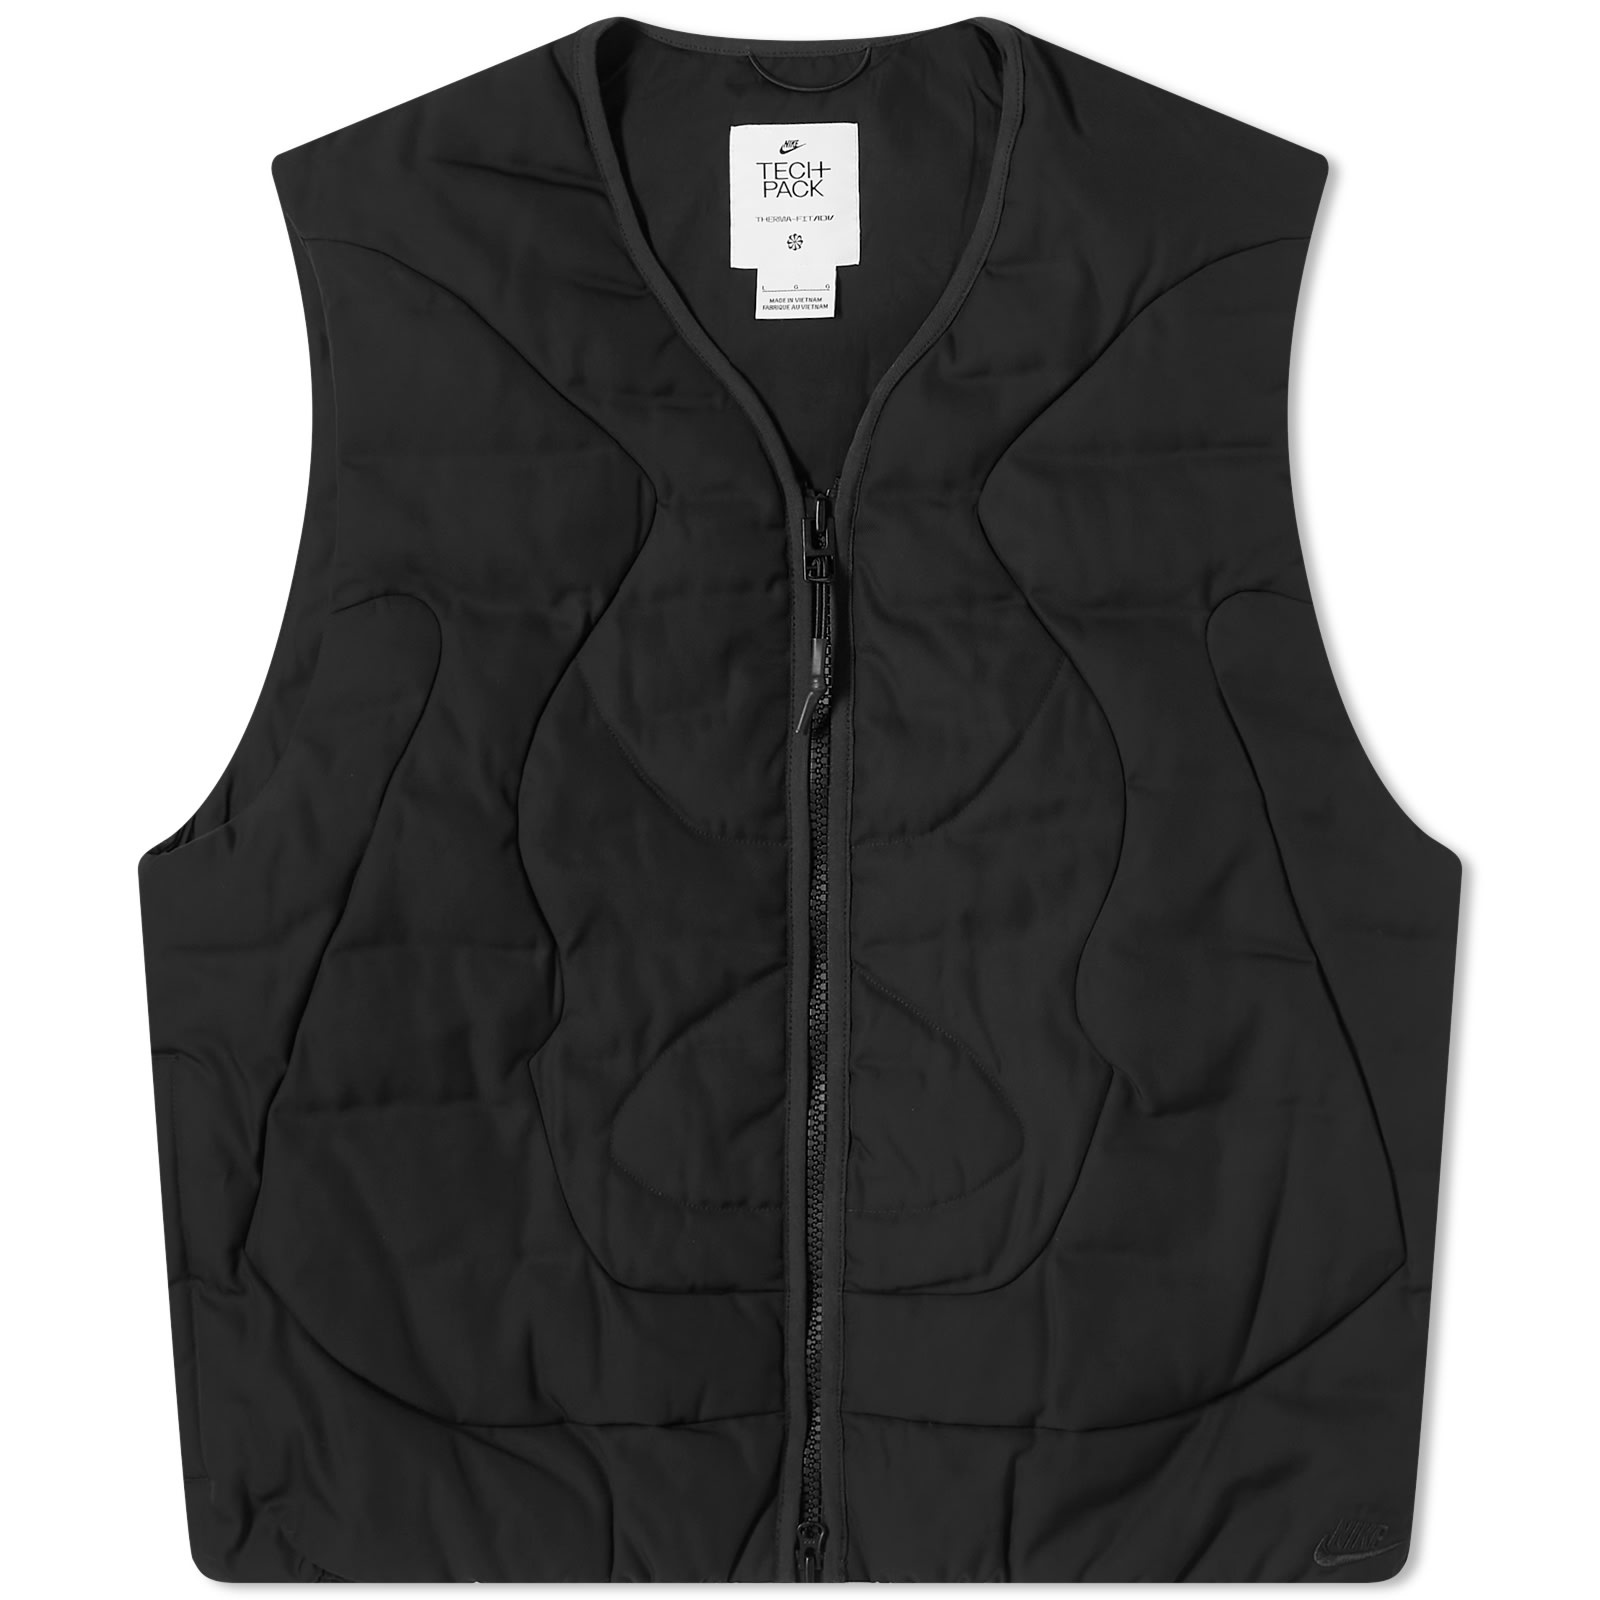 Nike Tech Pack Insulated Atlas Vest - 1